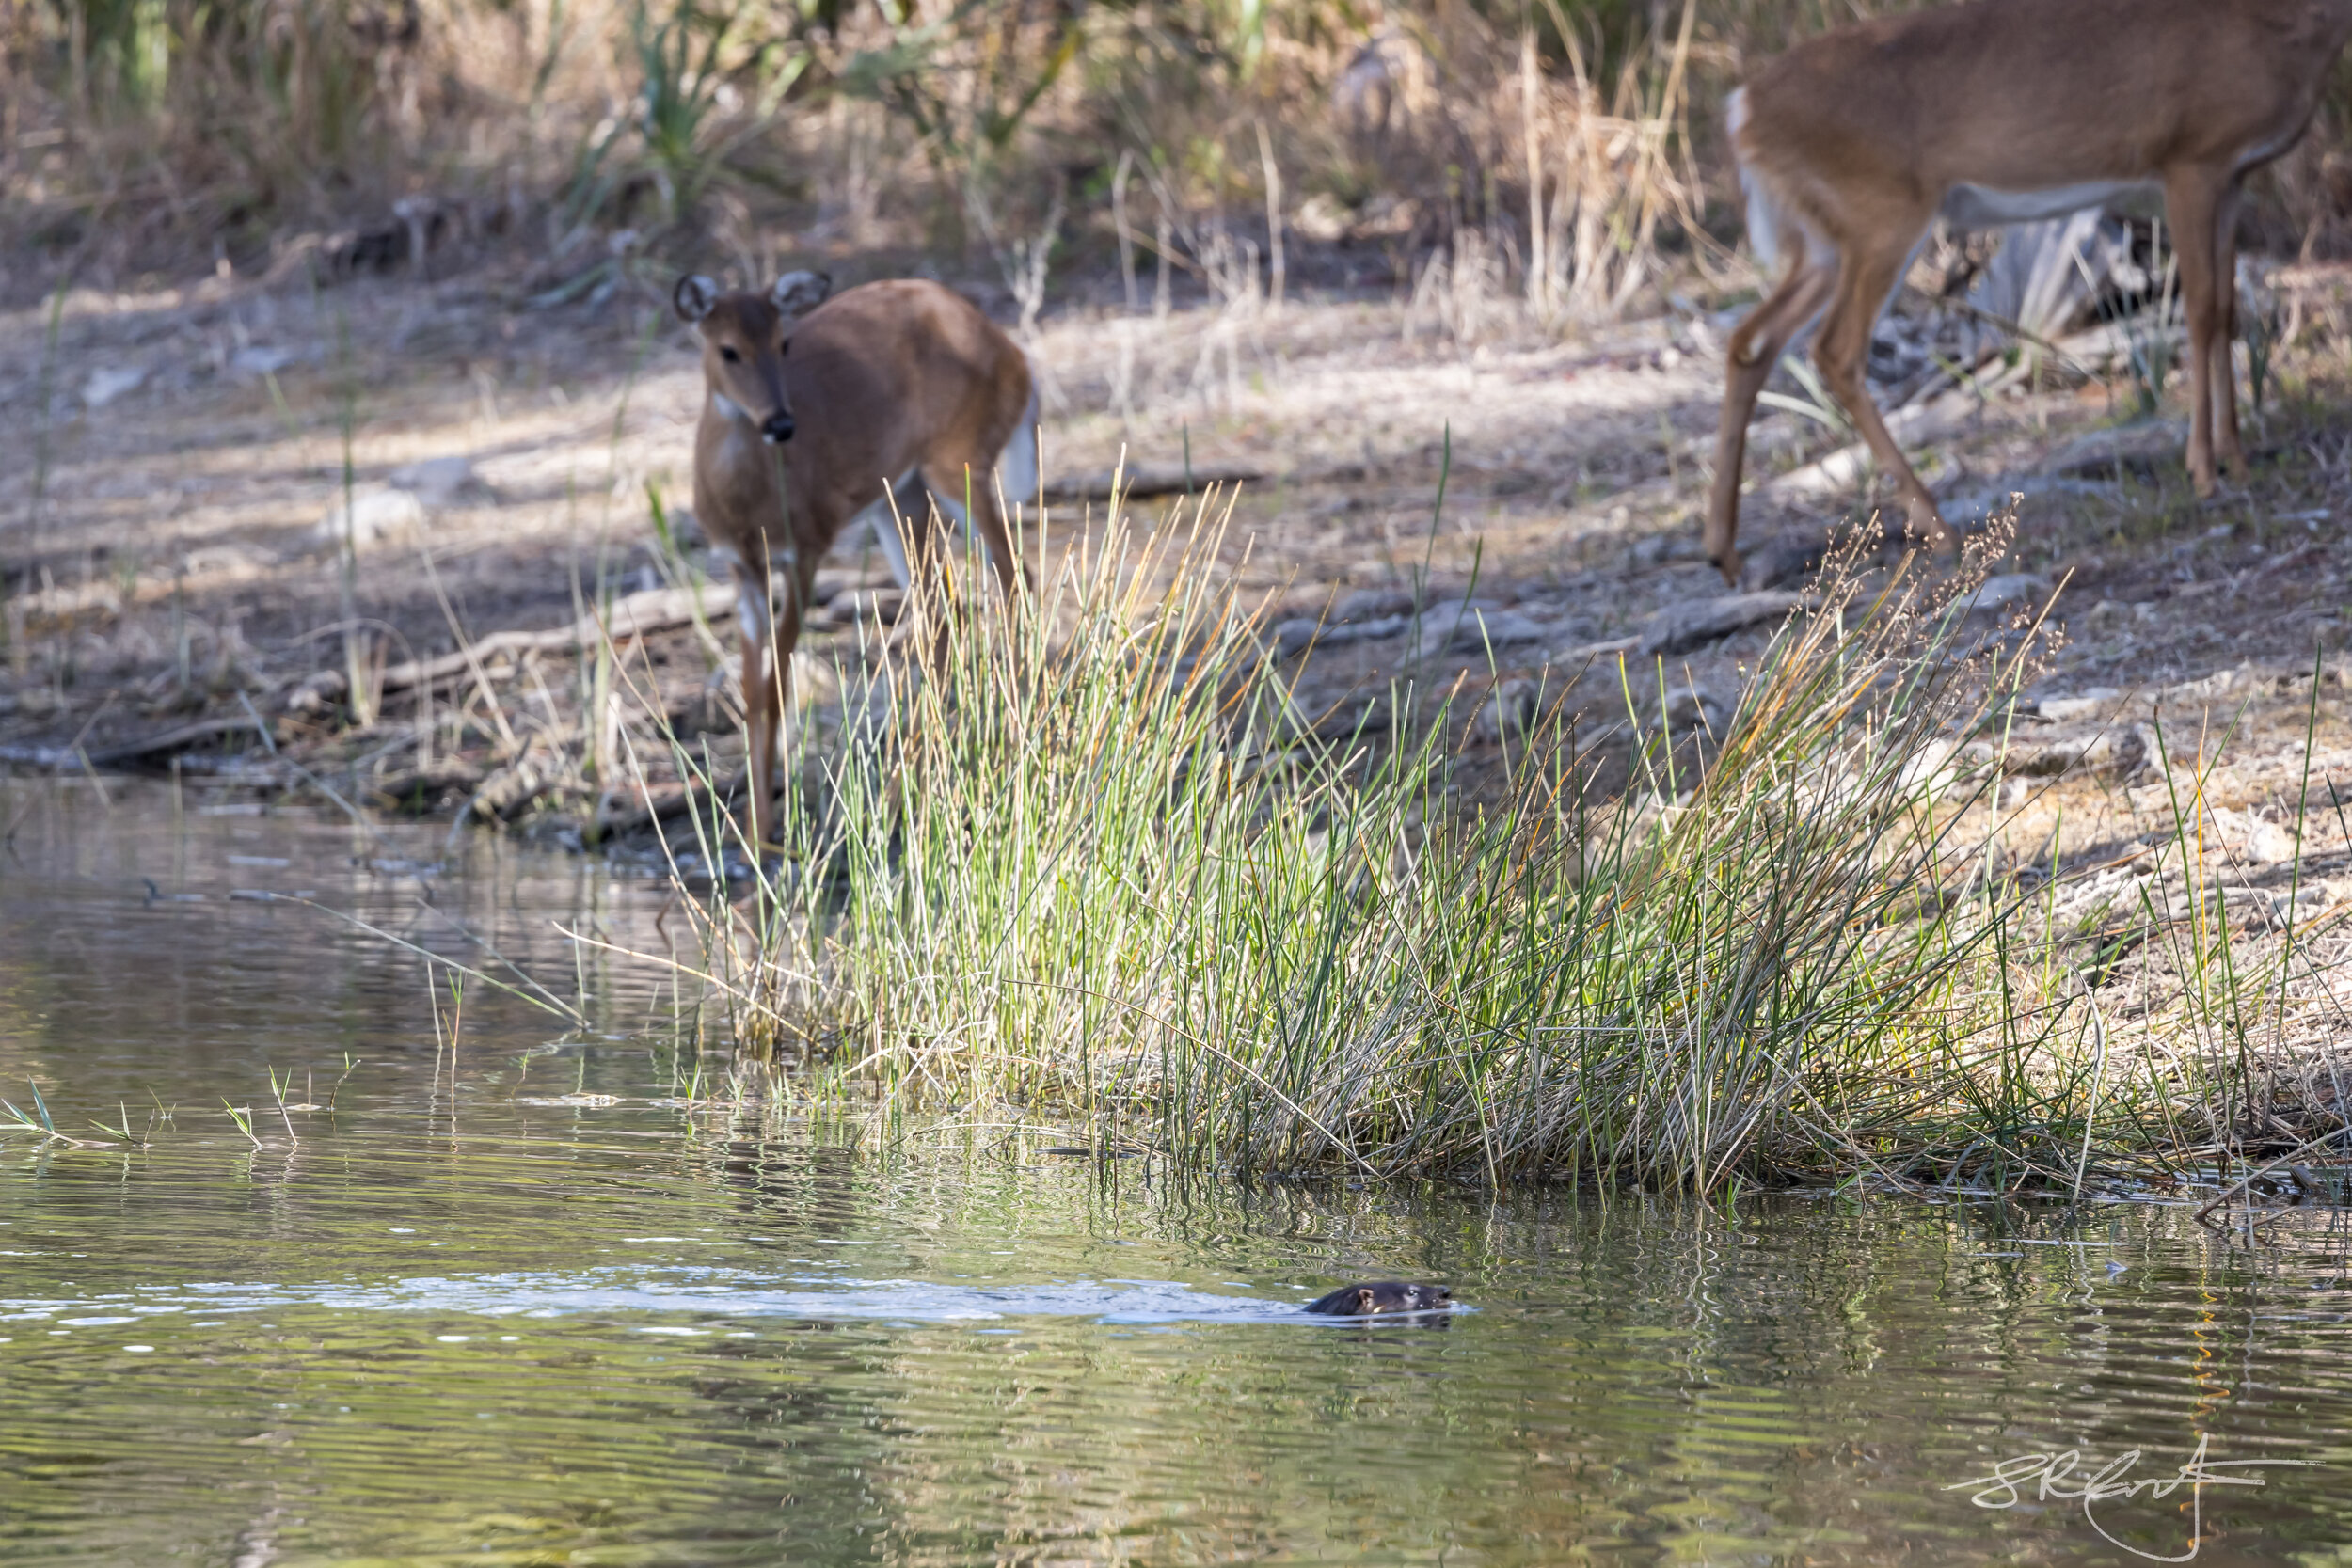 Deer looking on as an Otter swims by.